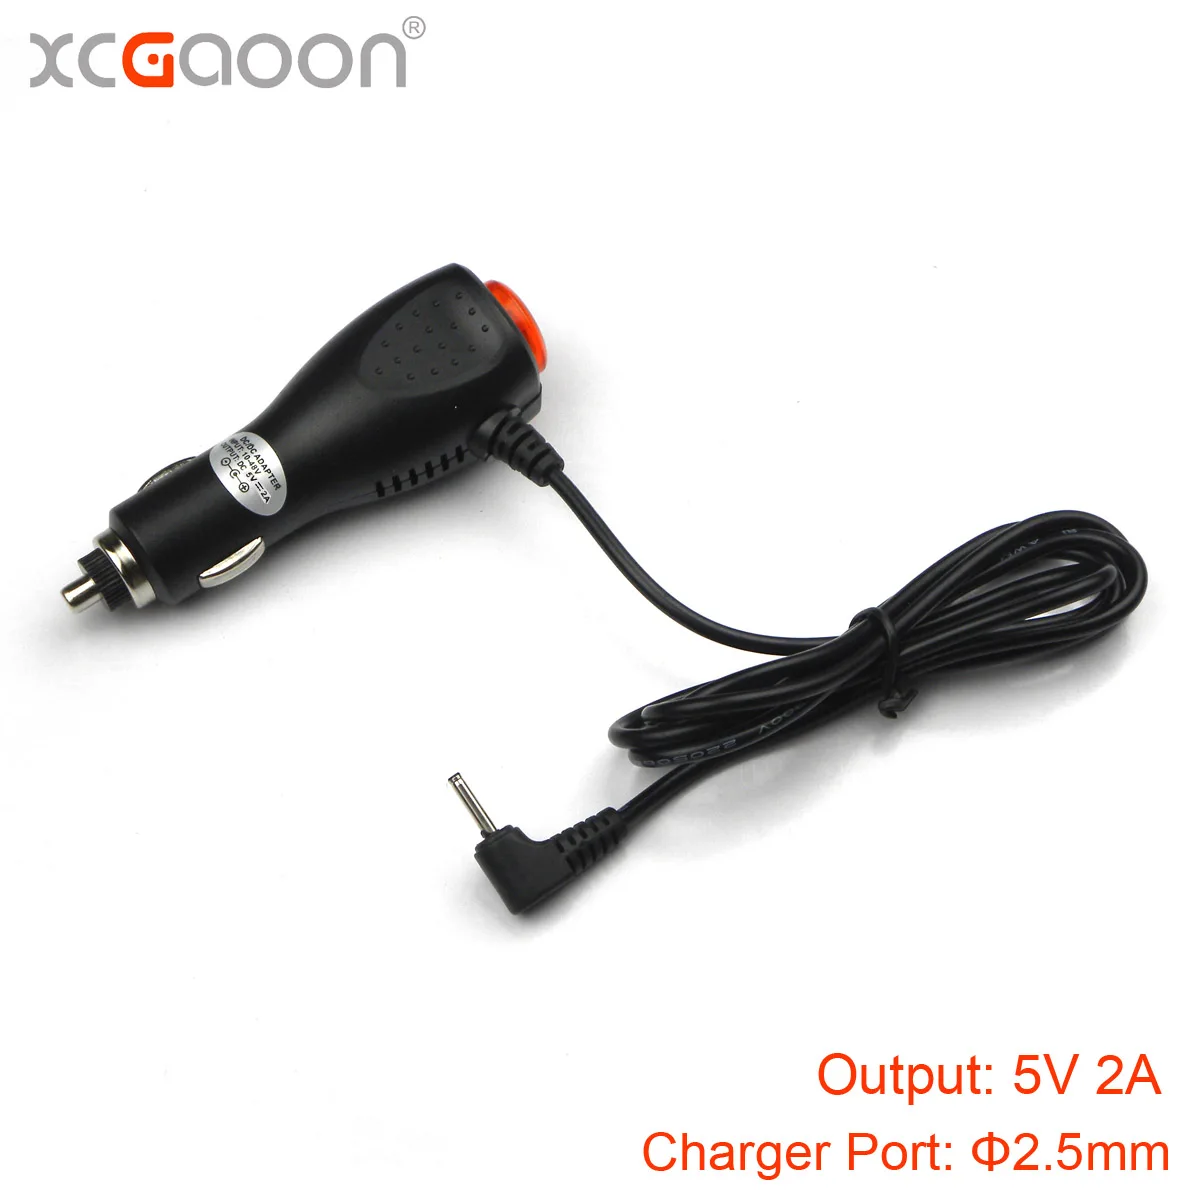 

XCGaoon 2.5mm Port 5V 2A Car Charger Adapter for Radar Detector & GPS, Input DC 12V - 24V, Cable Length 1.2meter ( 3.93ft )